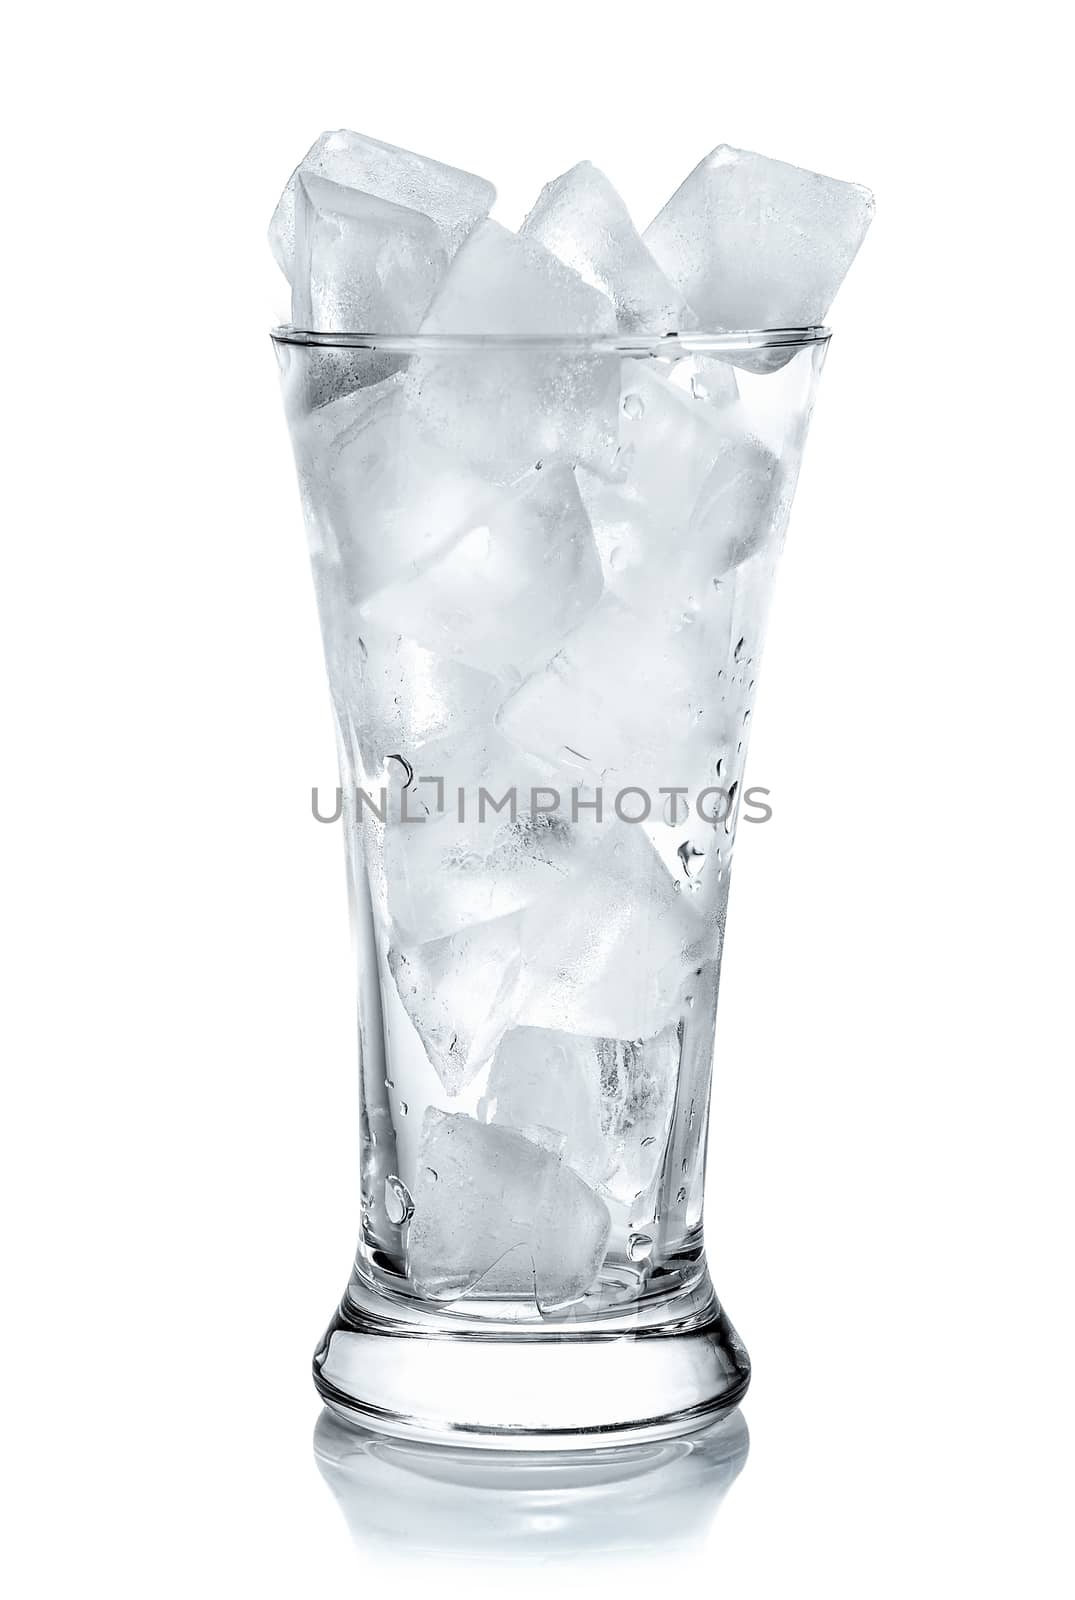 Glass with ice cubes. Isolated on white background